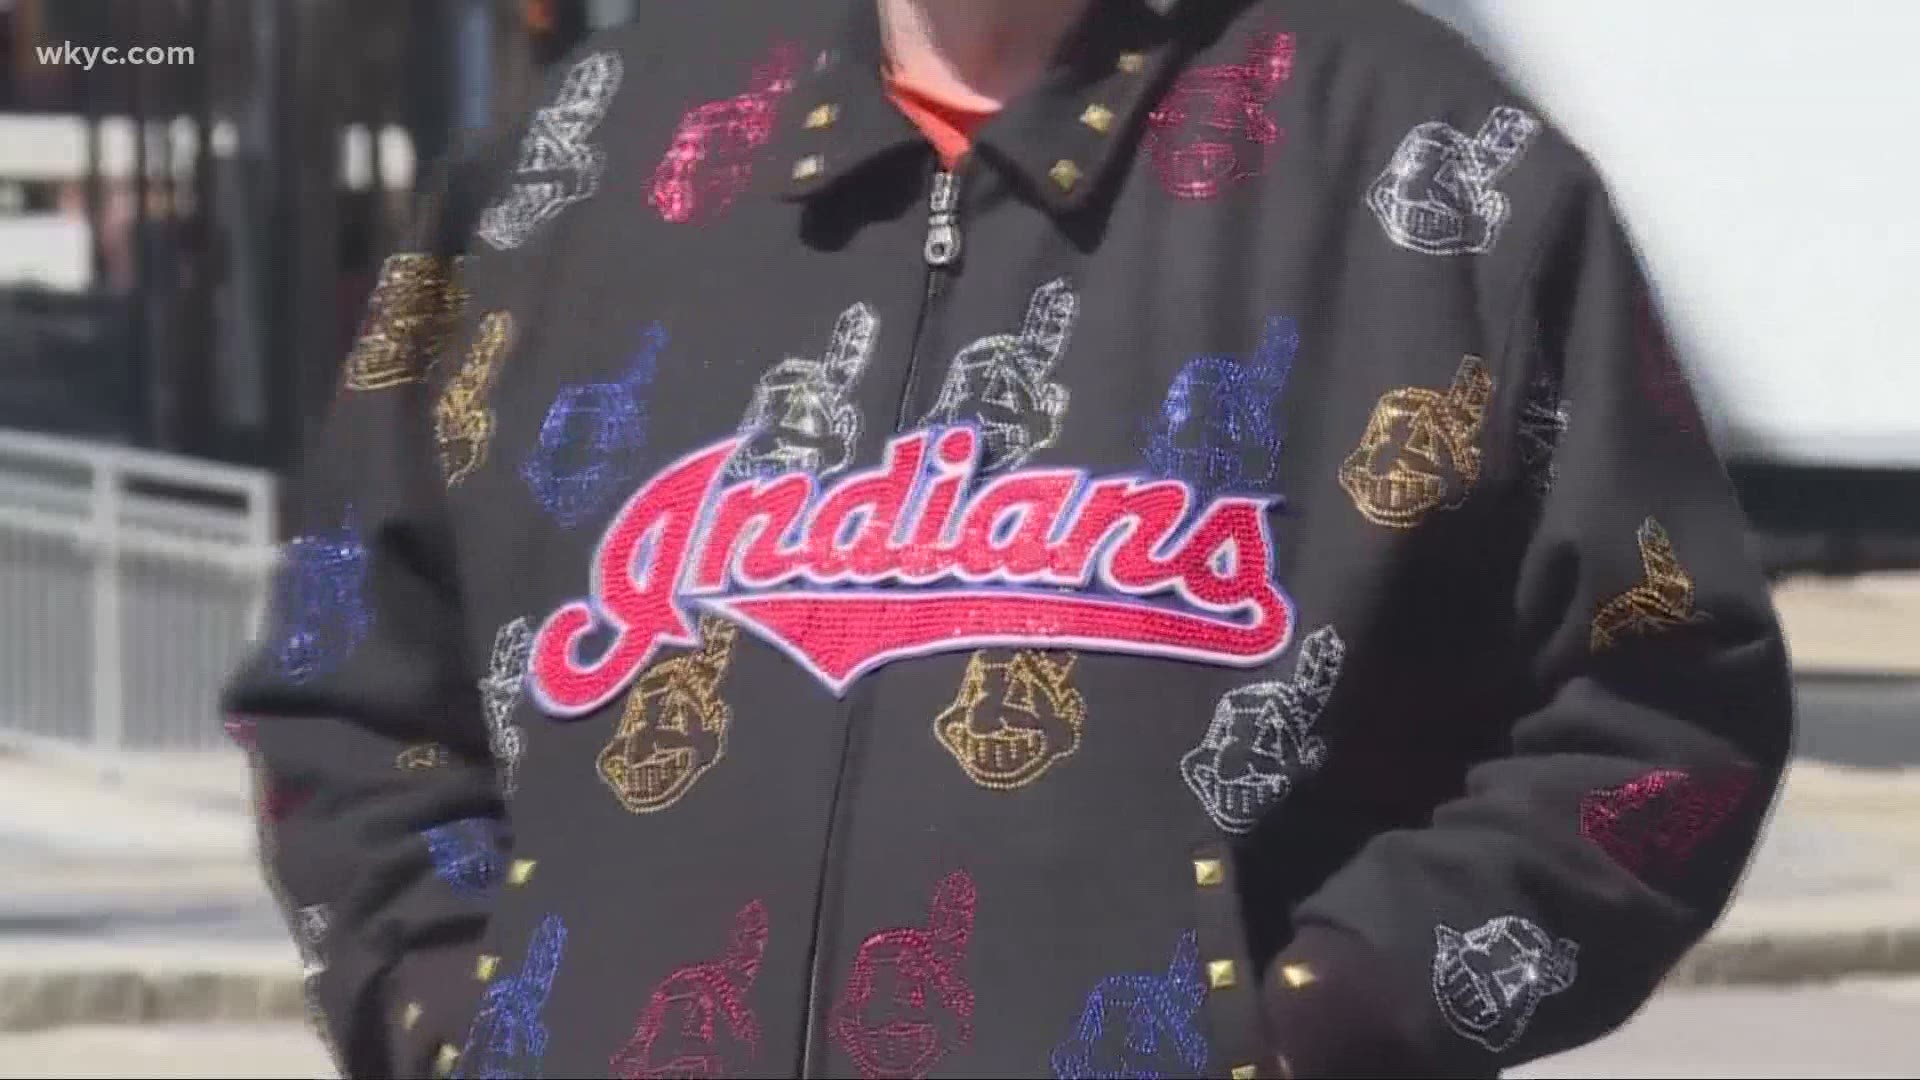 We're another day closer to Monday's Indians home opener. But game day will look and feel different than other years-- and not just because of the pandemic.